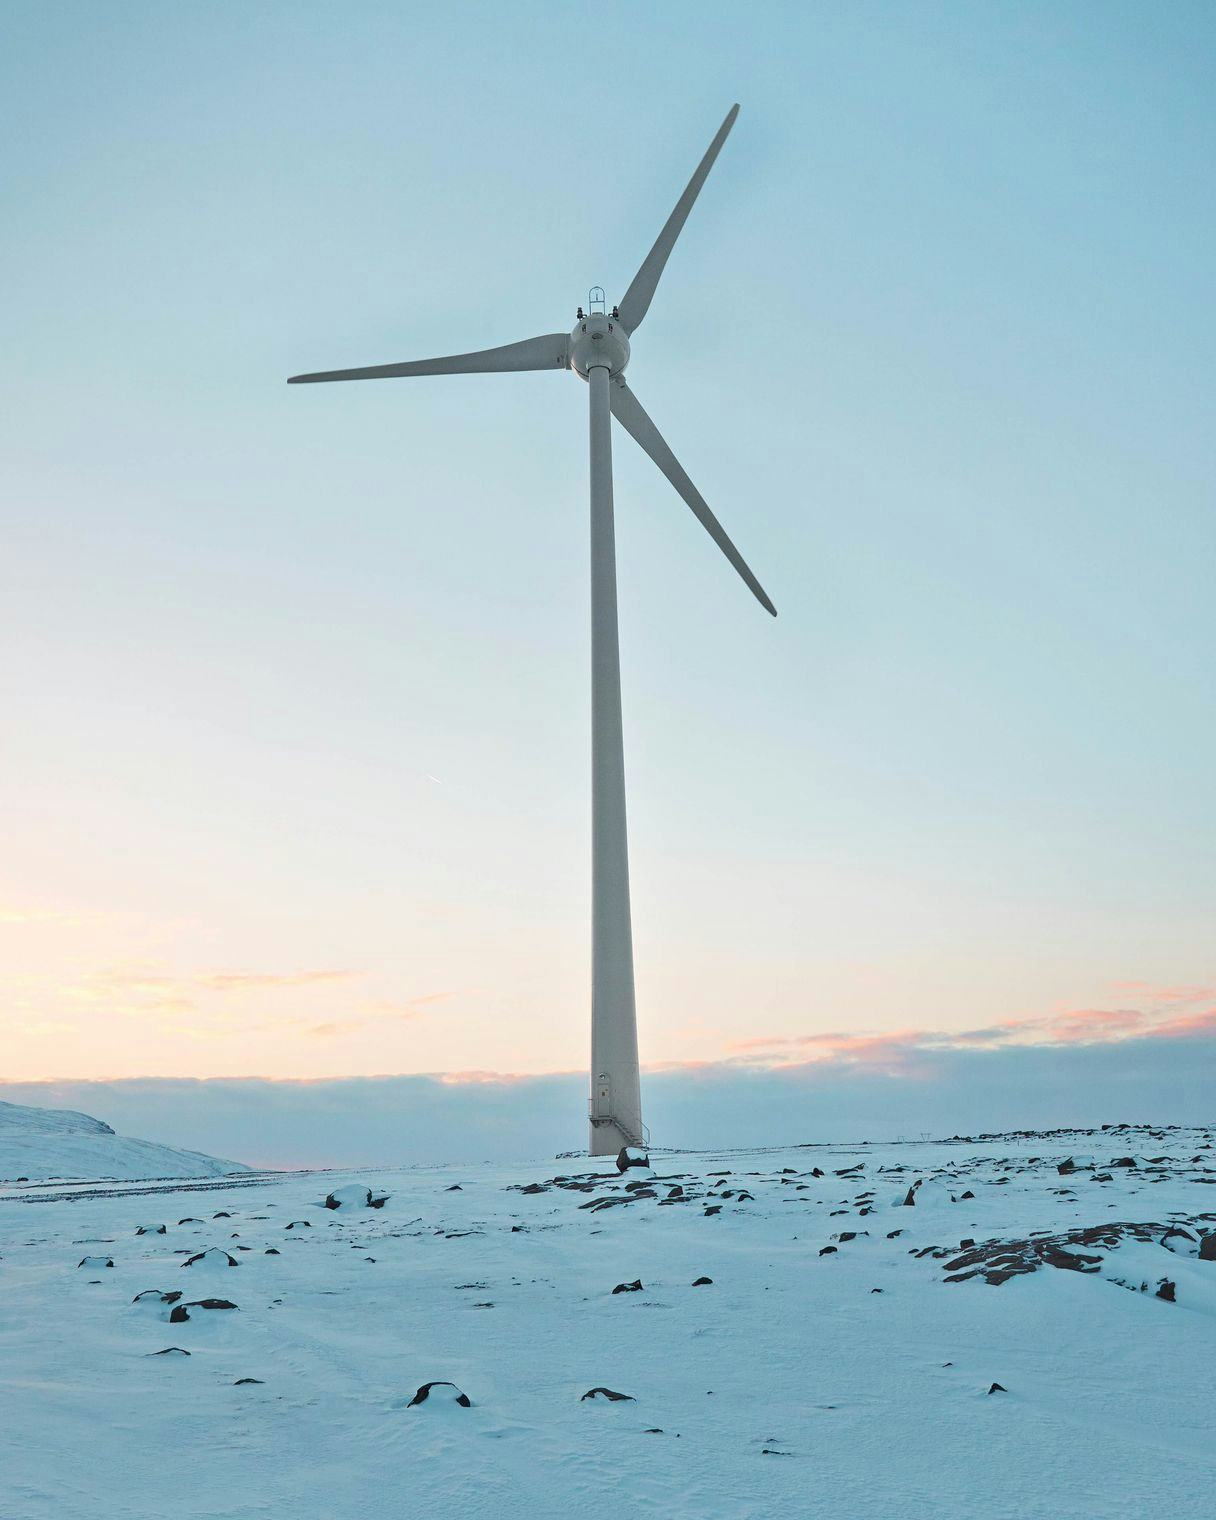 A single wind turbine against a snowy landscape with low sun on the horizon